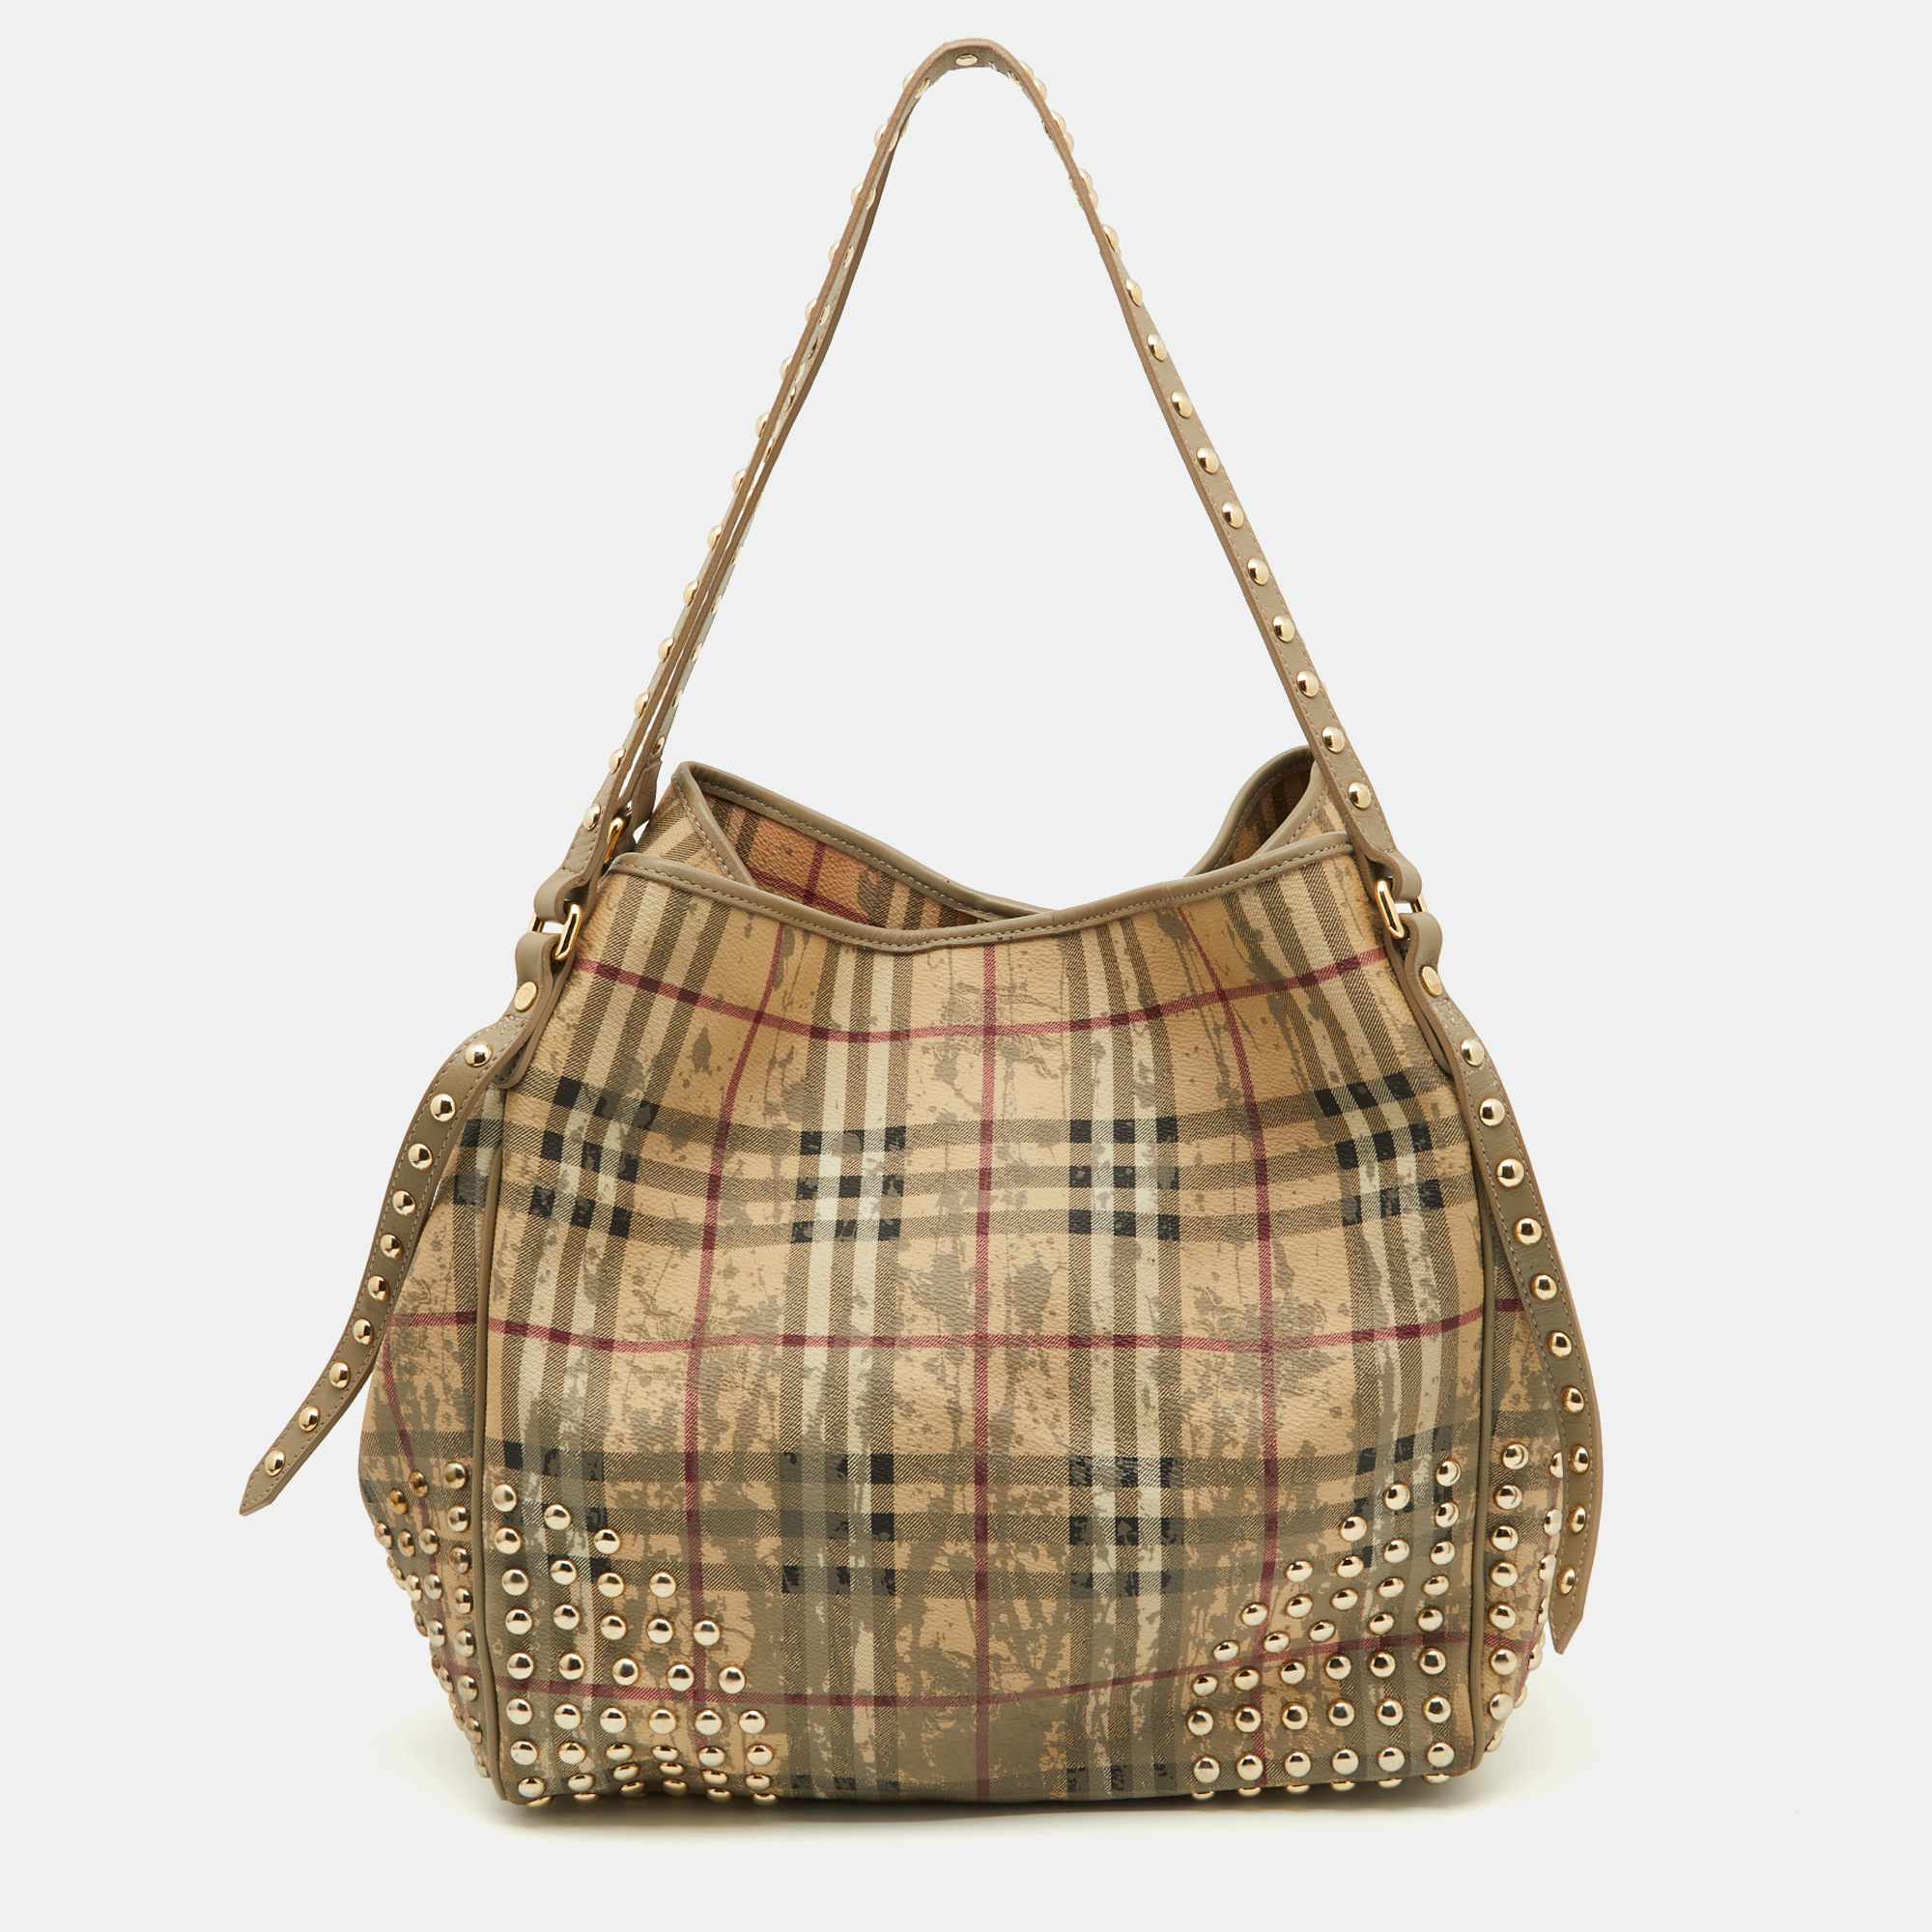 This Burberry tote is a result of blending high crafting skills with a practical design. It arrives with a durable exterior completed by luxe detailing. It is an accessory that you can count on.